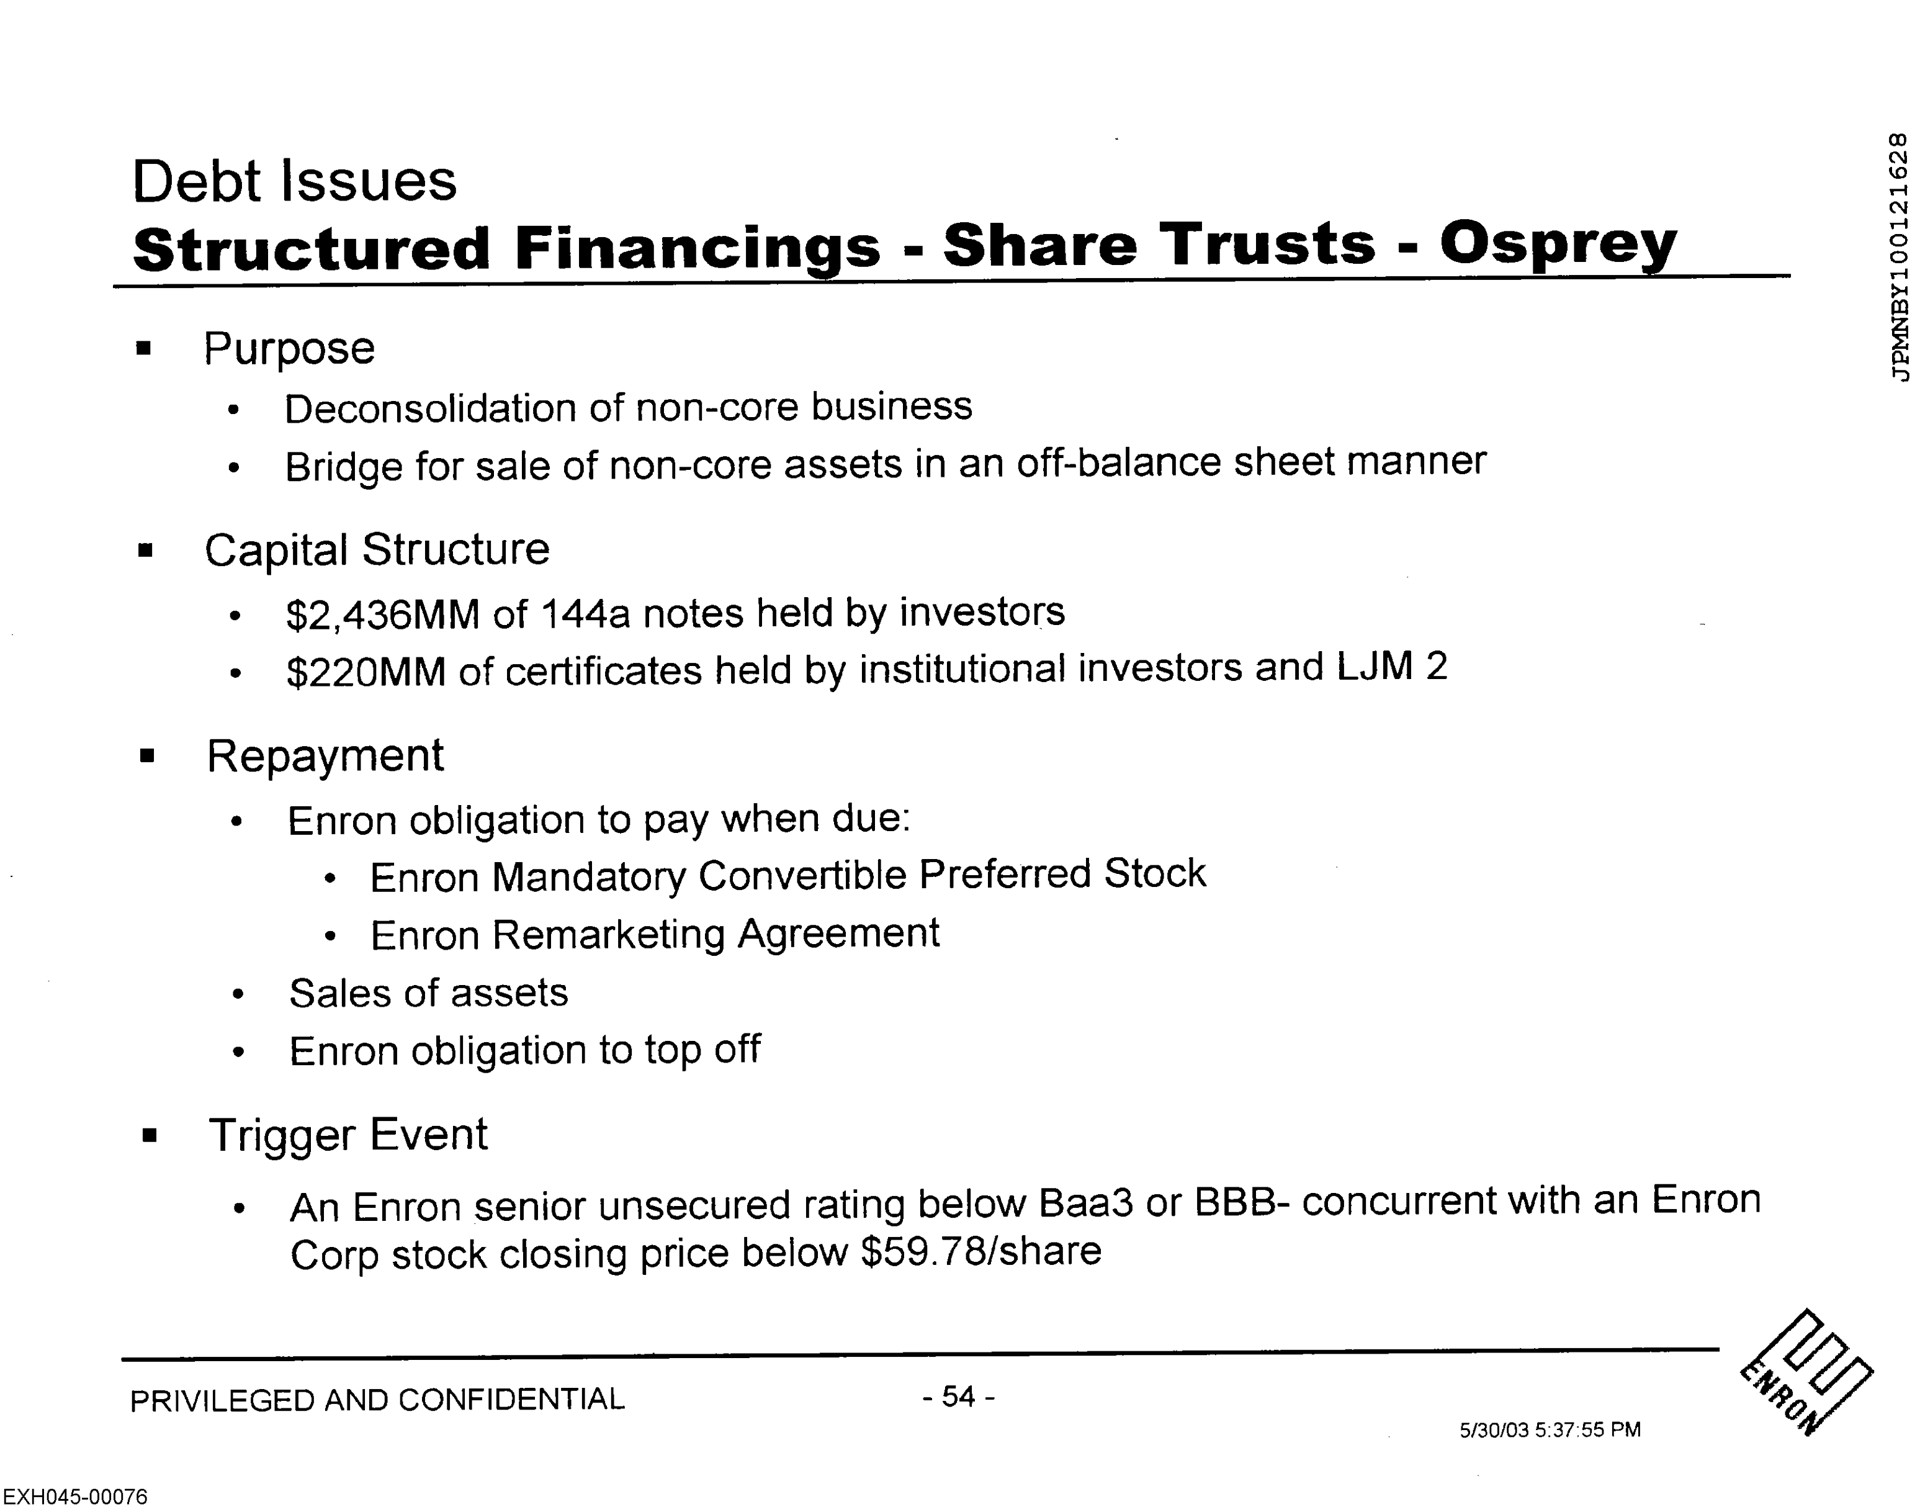 debt issues structured financings share trusts osprey | Enron